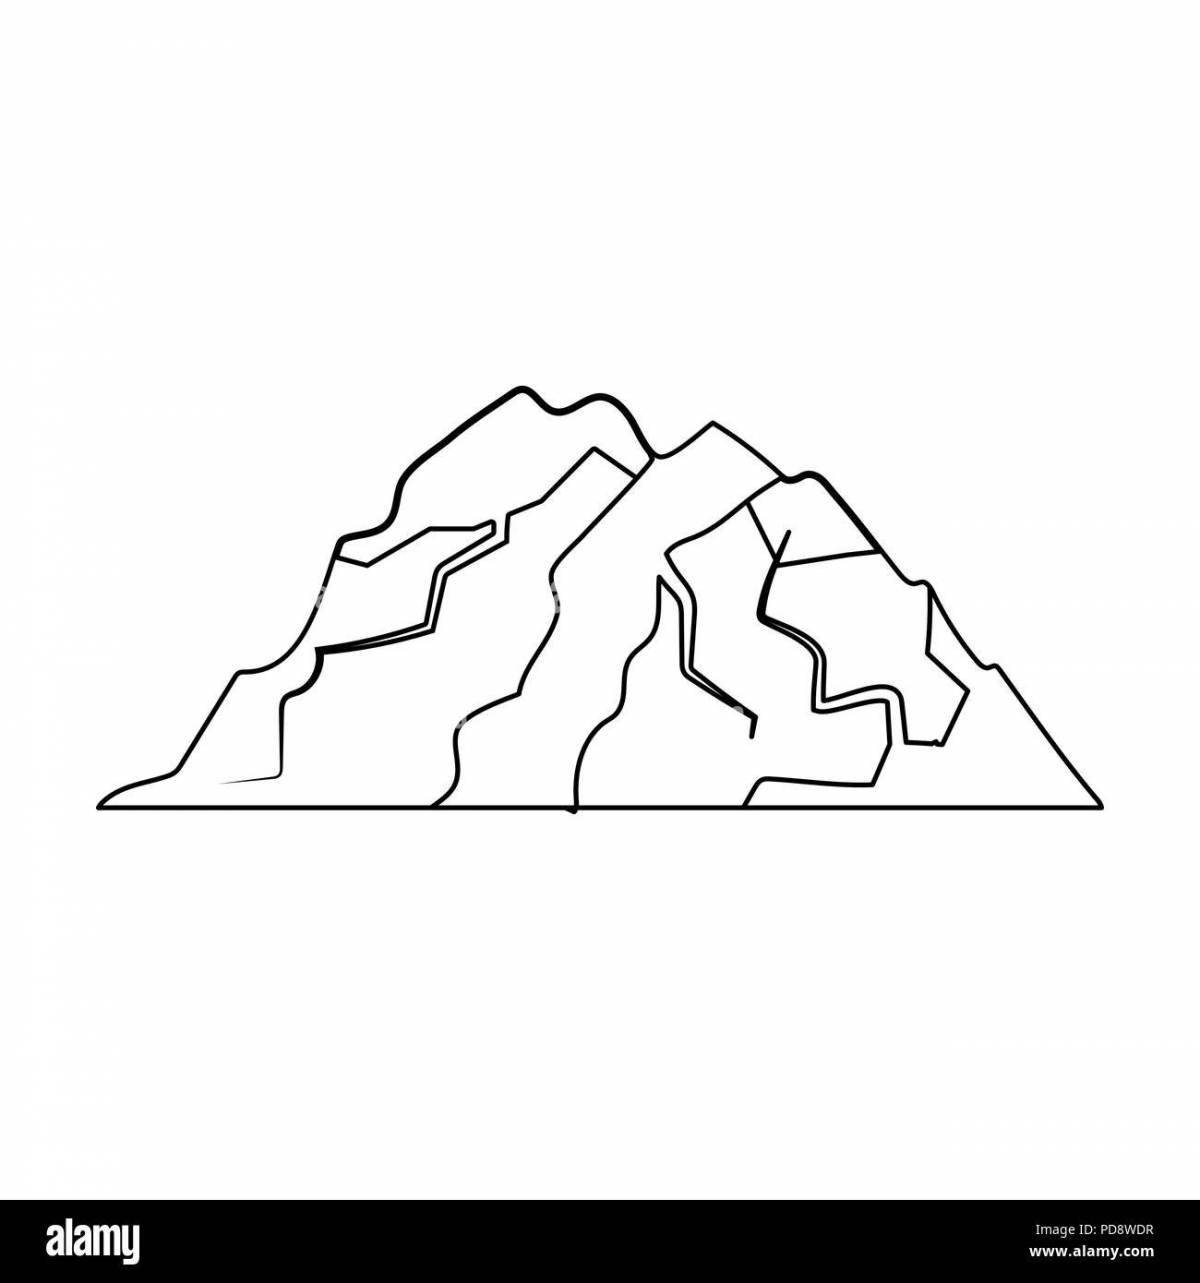 Majestic iceberg coloring page